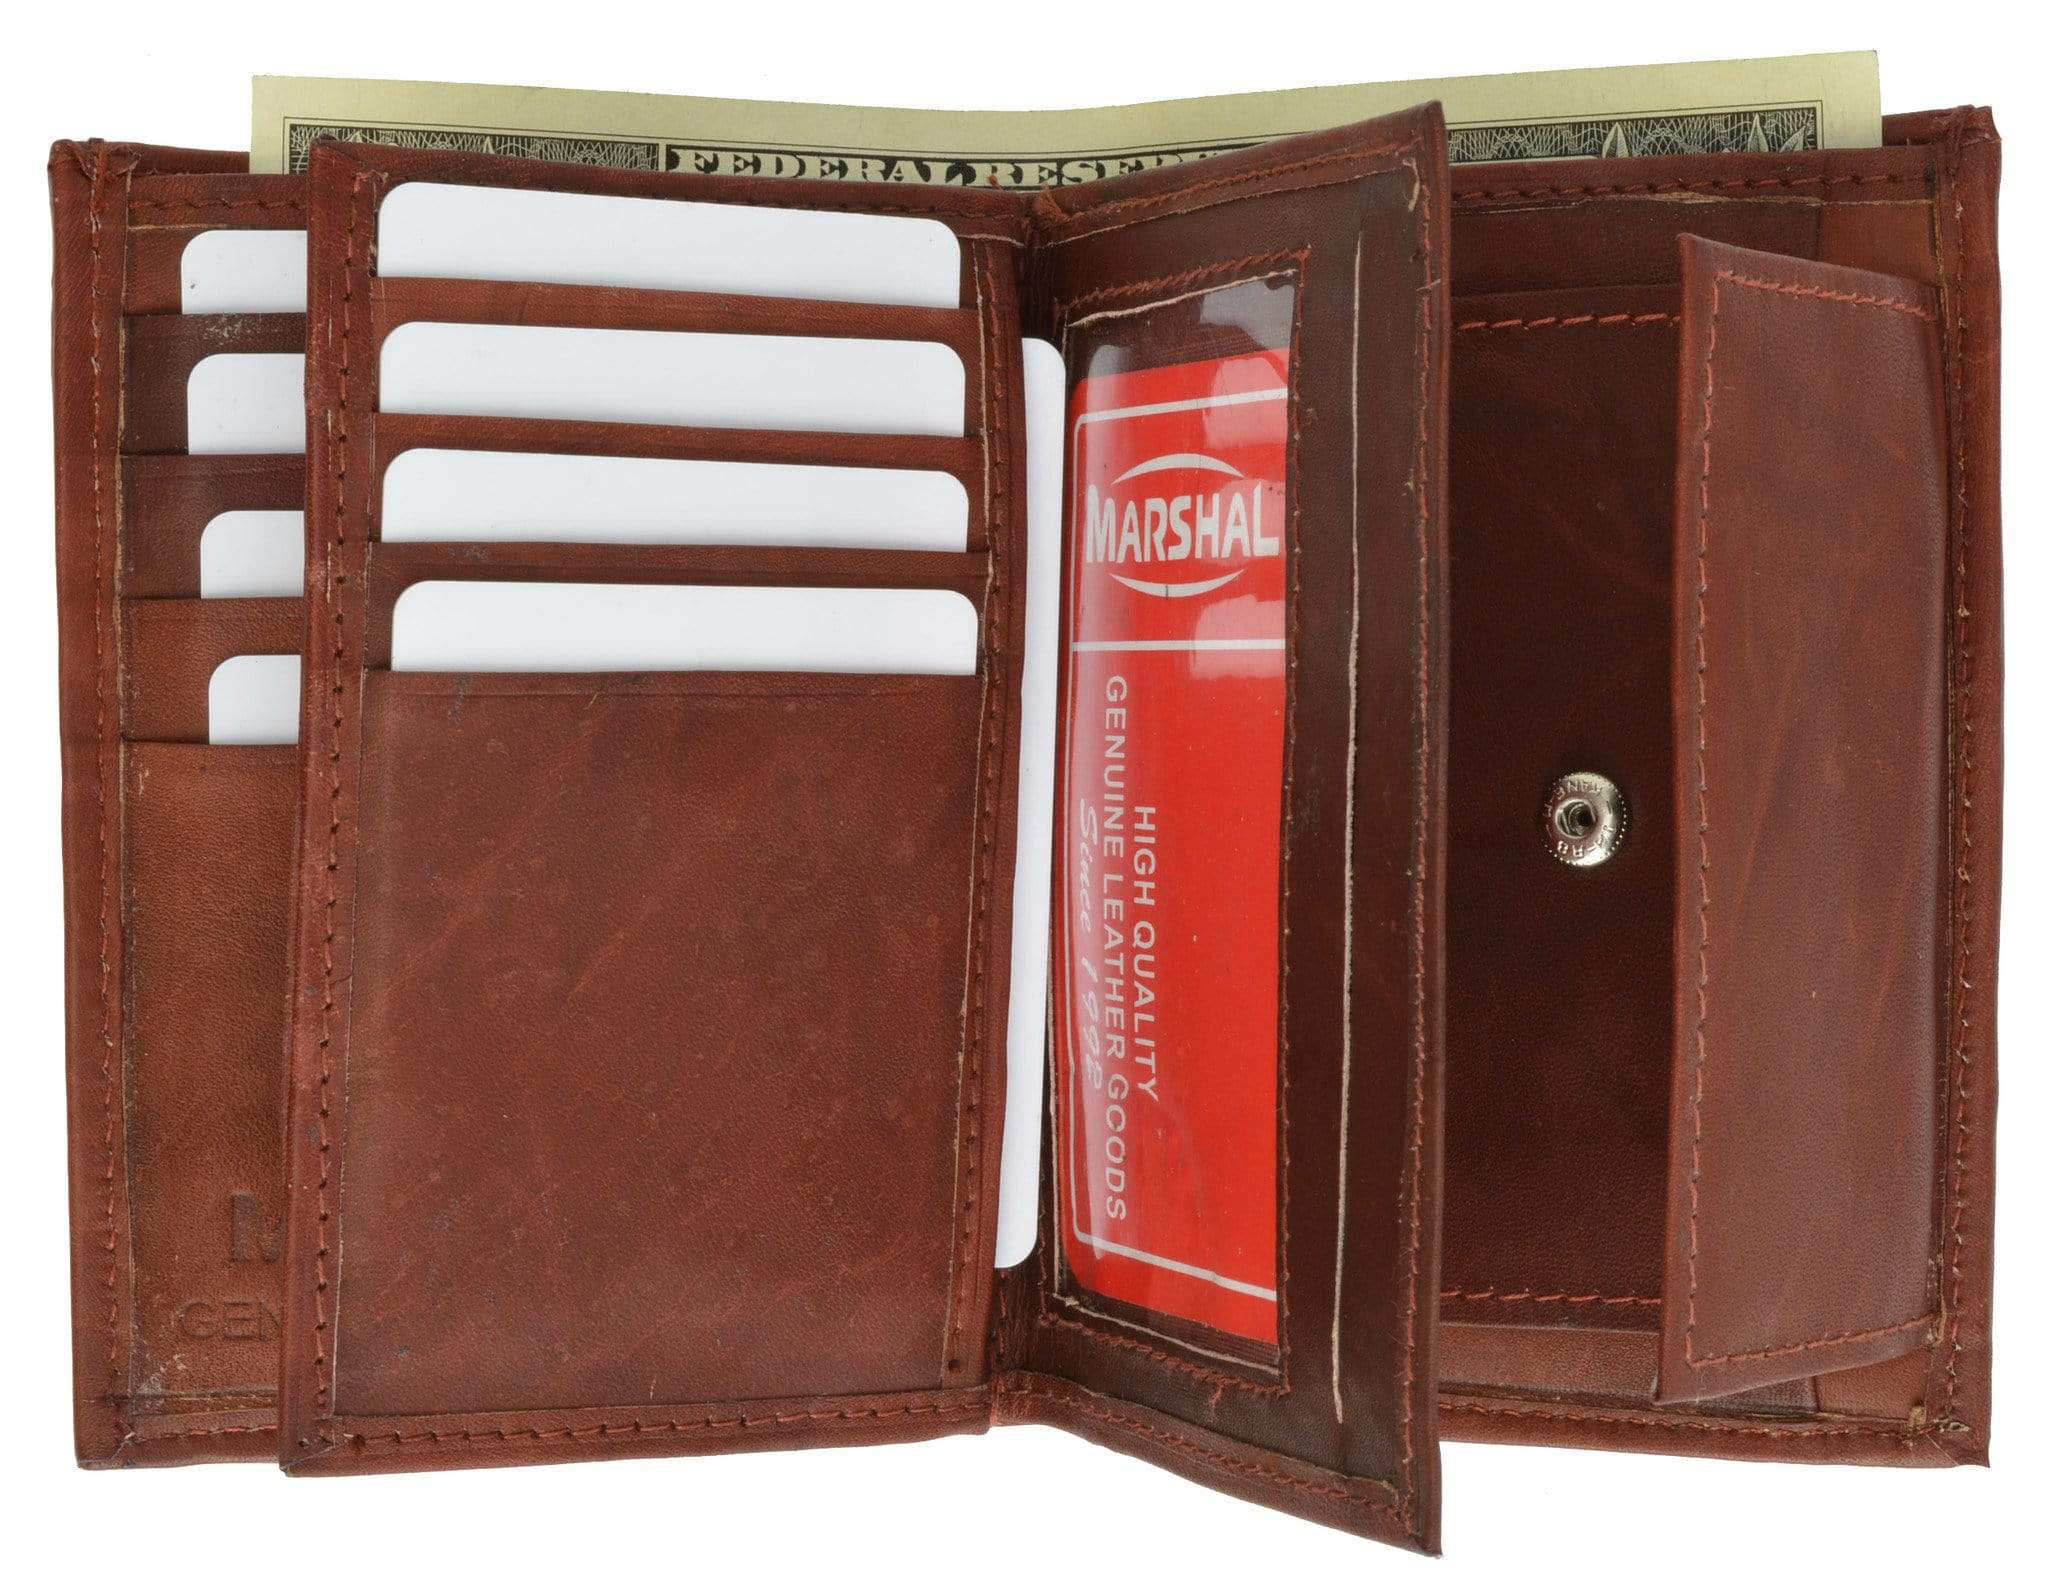 MENS SOFT LEATHER TRIFOLD WALLET 12 CREDIT CARD SLOTS AND COIN POCKET 2 COLOR 